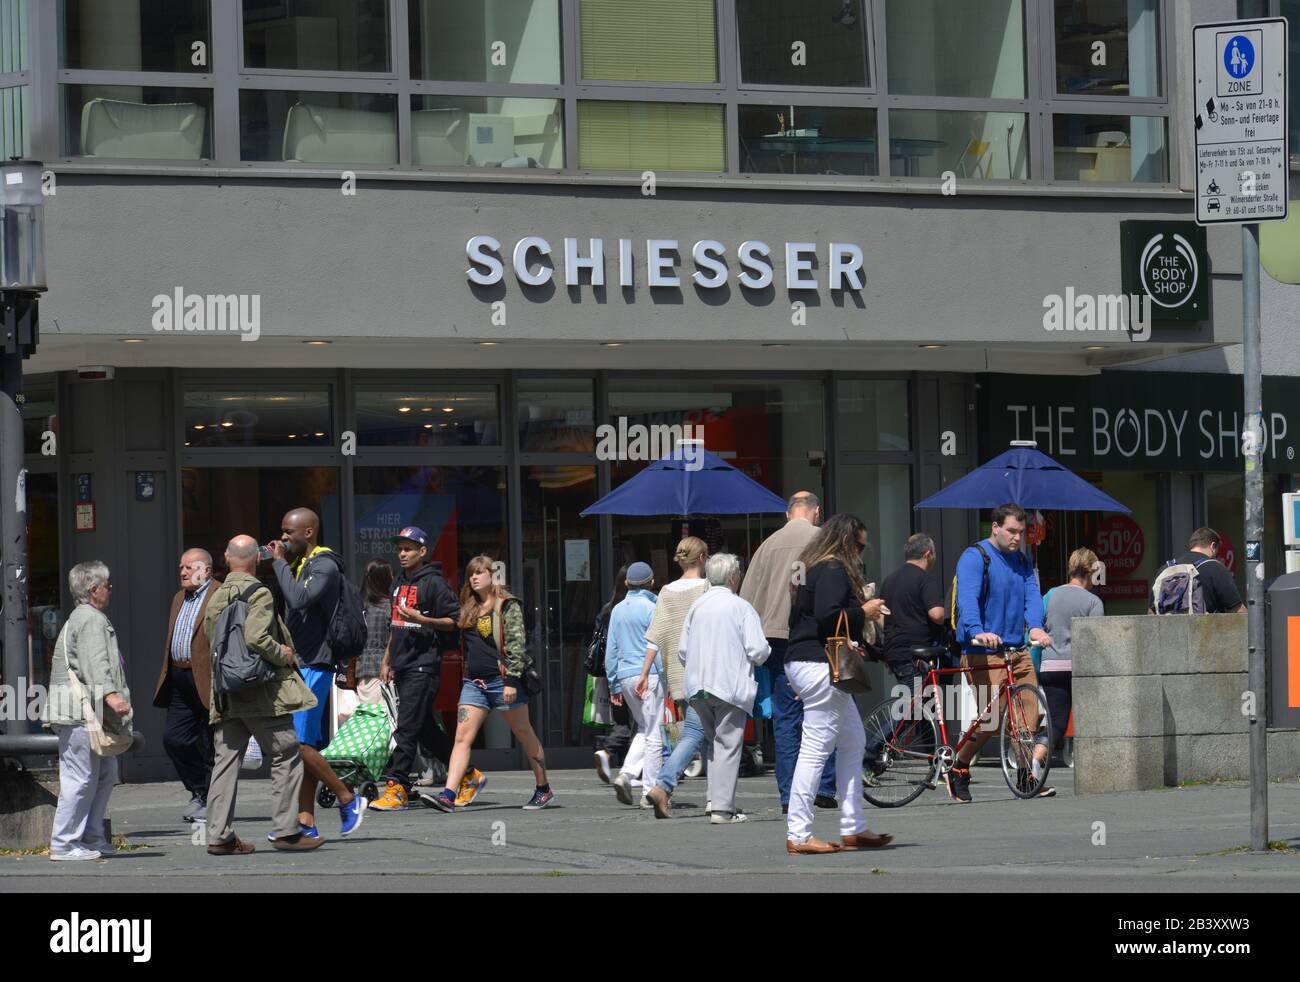 Schiesser High Resolution Stock Photography and Images - Alamy